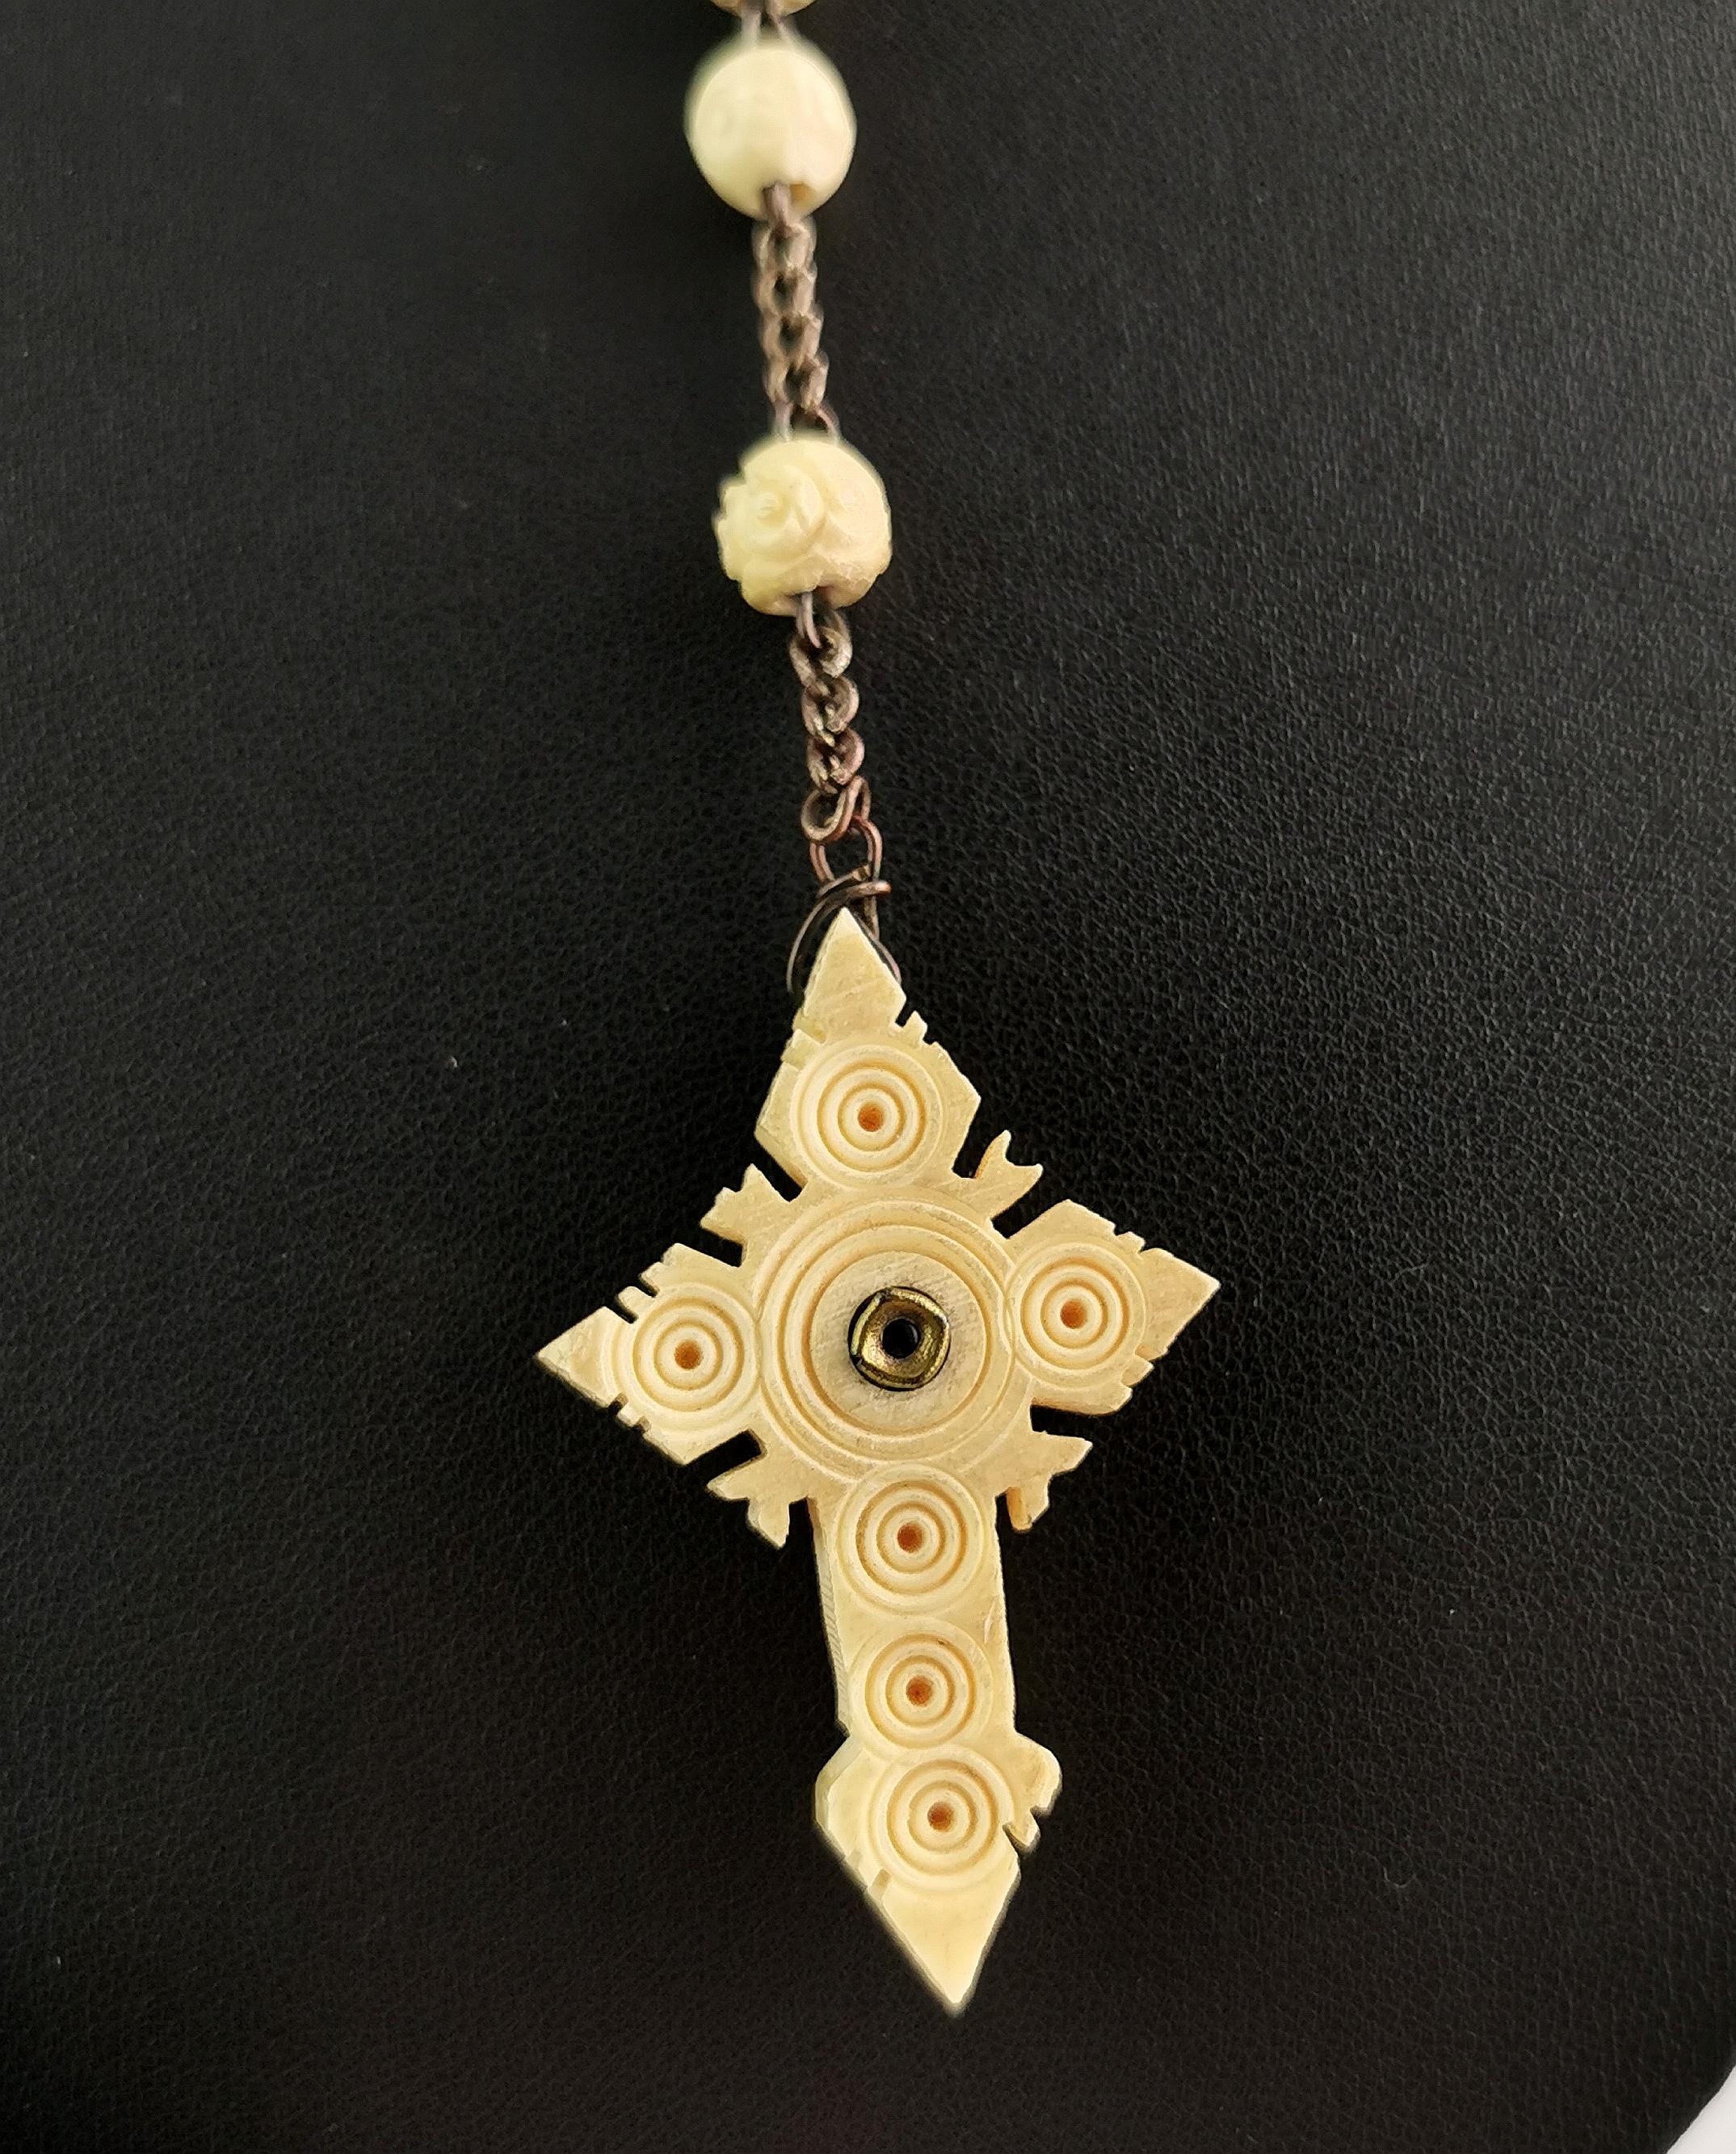 Antique French carved bone rosary bead necklace, Cross pendant, Stanhope  3